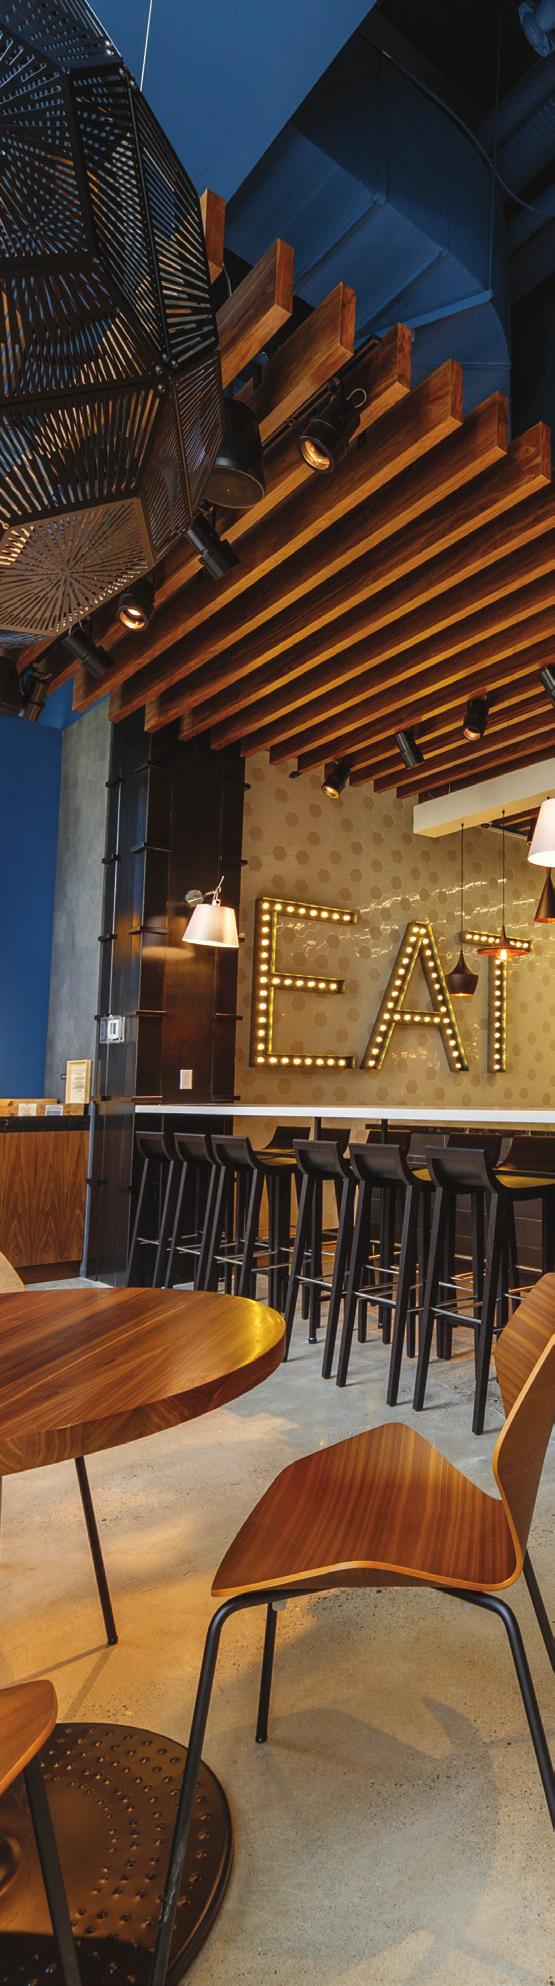 CATERING Located in the core of downtown Calgary, EAT-Eighth Avenue Trattoria offers convenient, chef-inspired corporate and office catering.